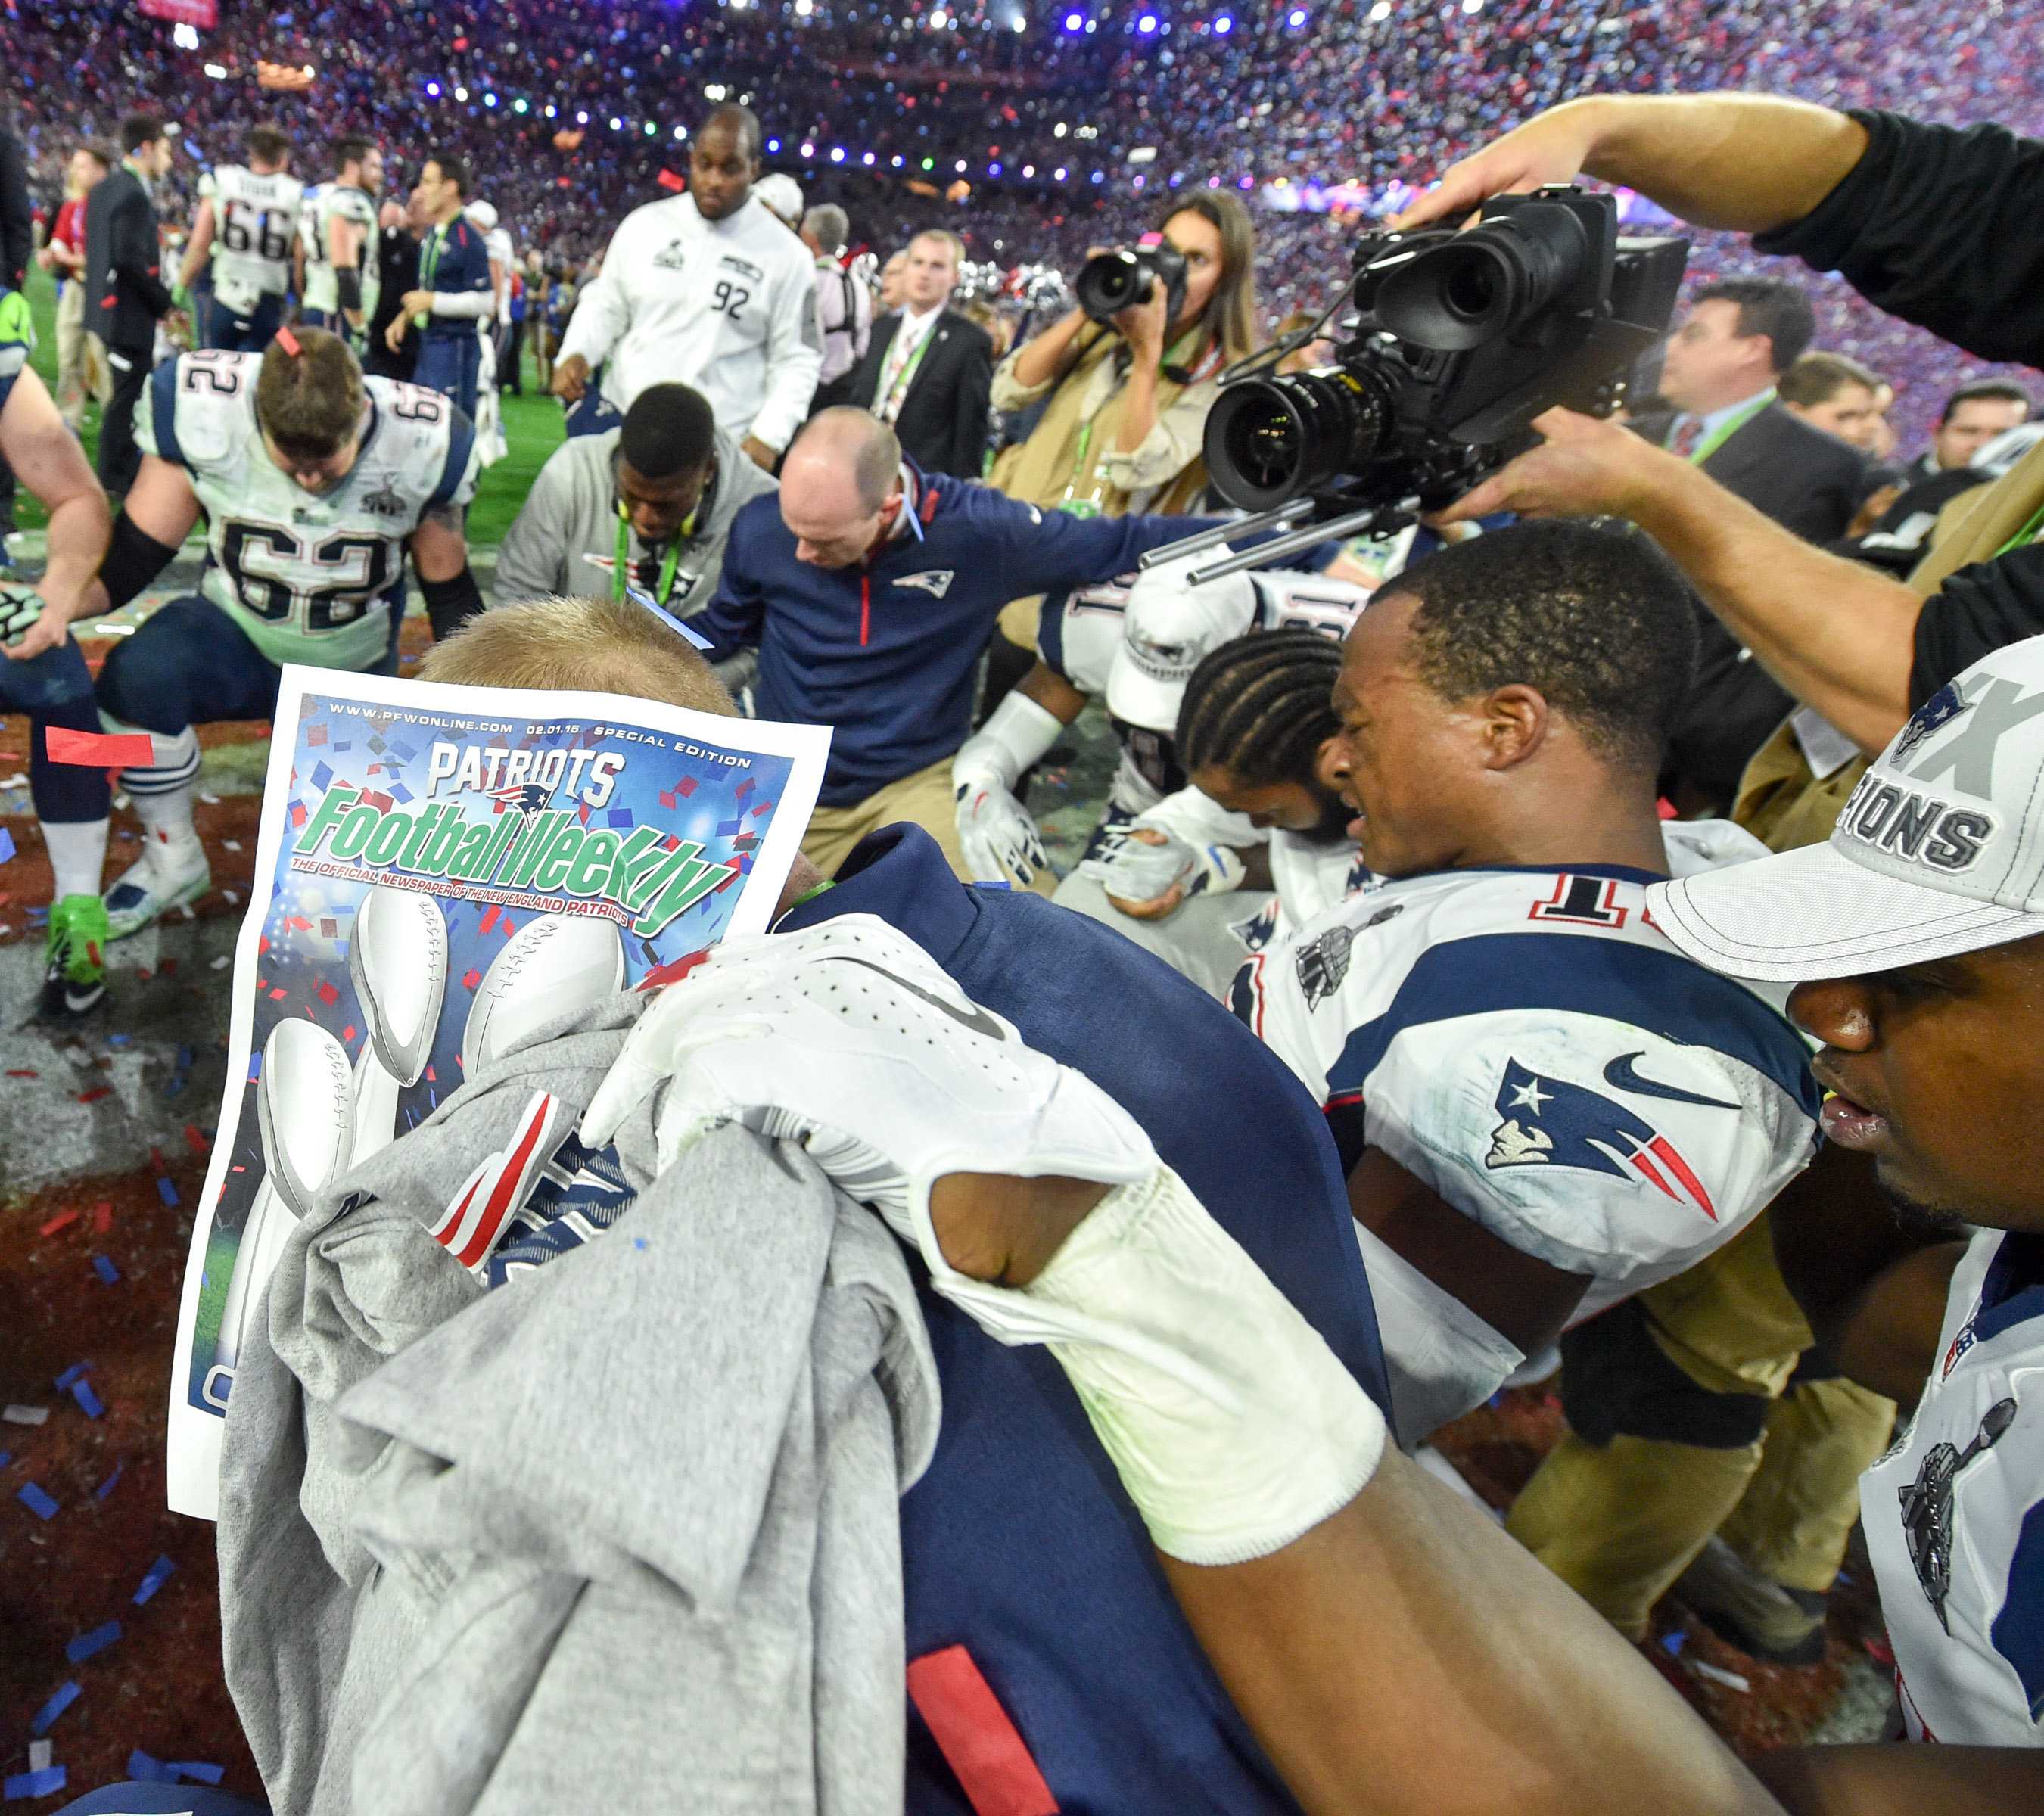 The+New+England+Patriots+celebrate+their+Super+Bowl+XLIX+win+over+the+Seattle+Seahawks%2C+28-24.+Photo+courtesy+of+Tribune+News+Services.